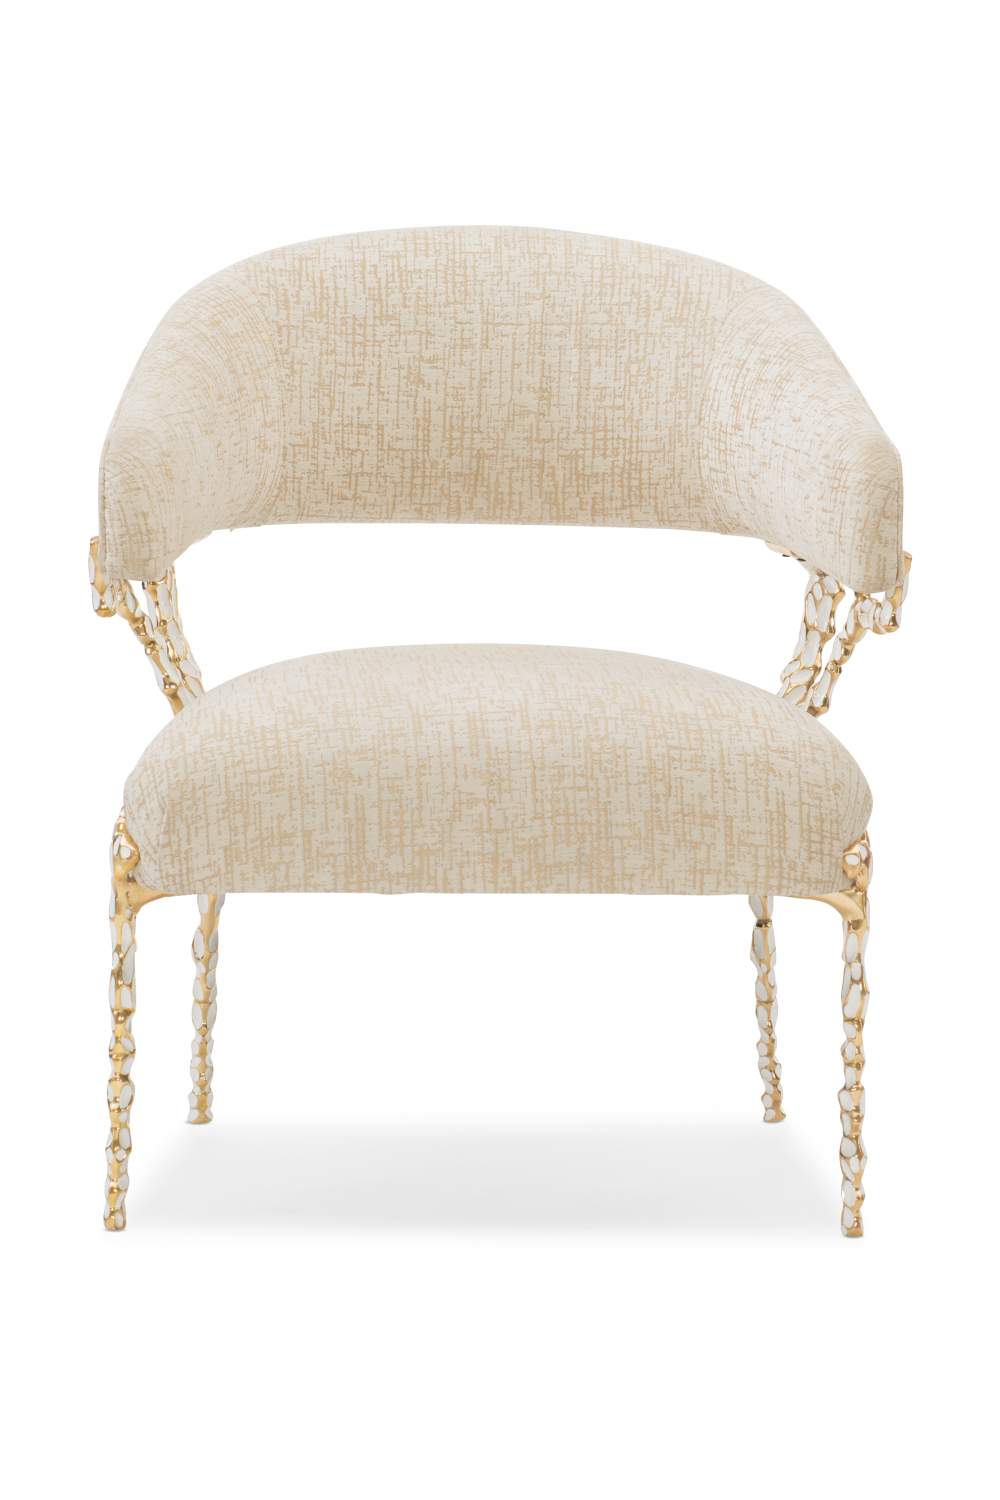 Embellished Modern Armchair | Caracole Glimmer of Home | Oroa.com